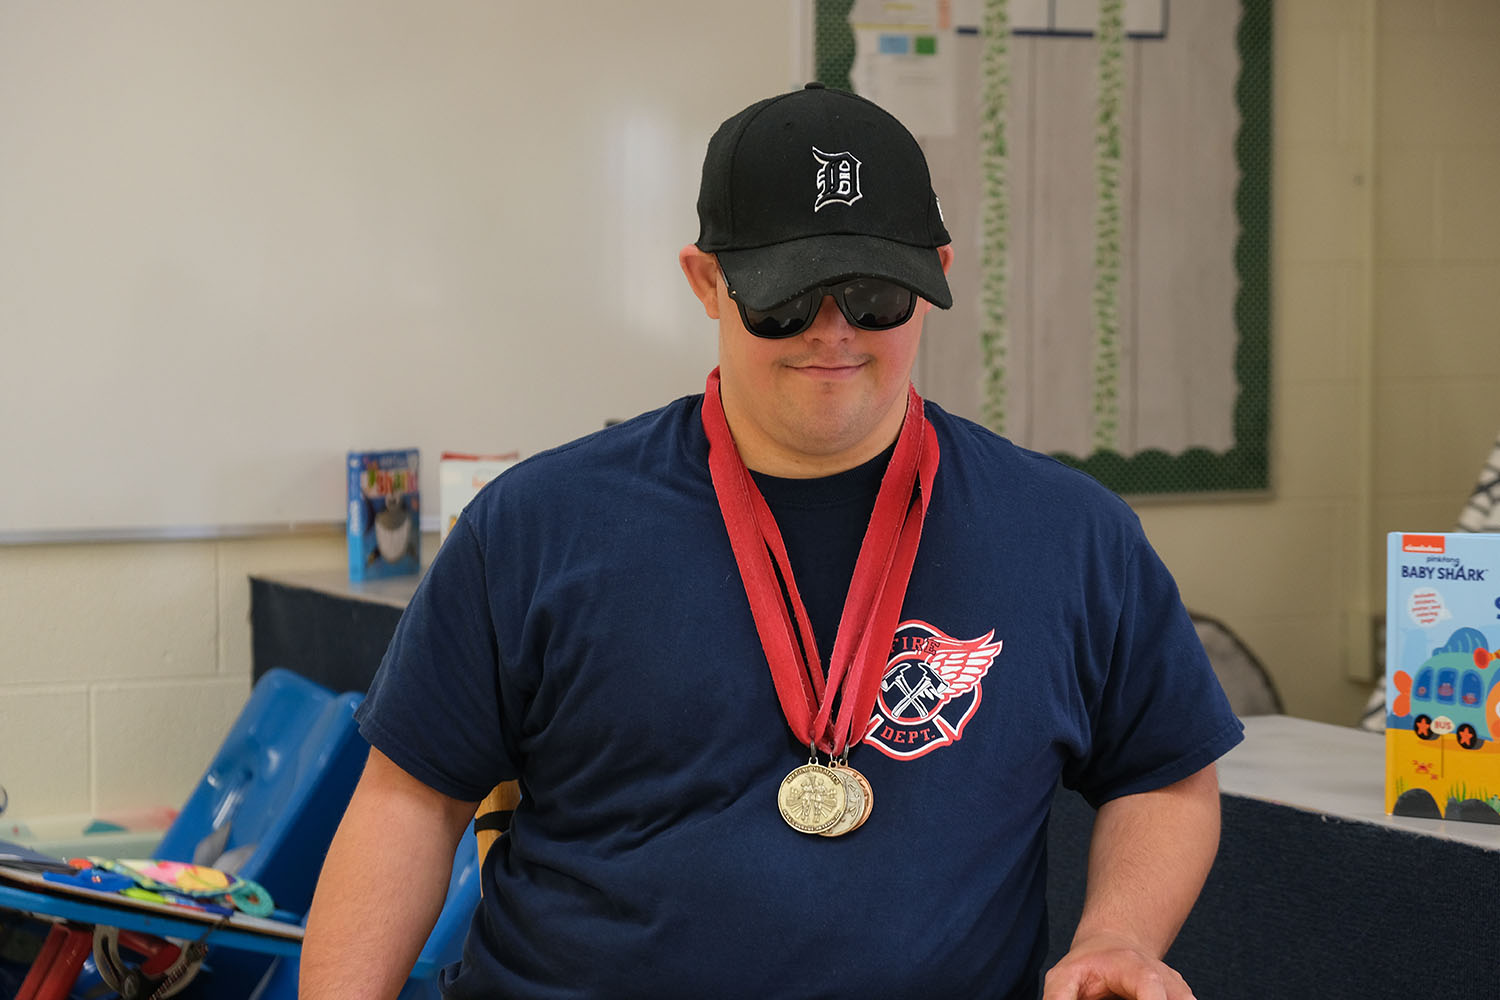 Young man with baseball caps wearing medals